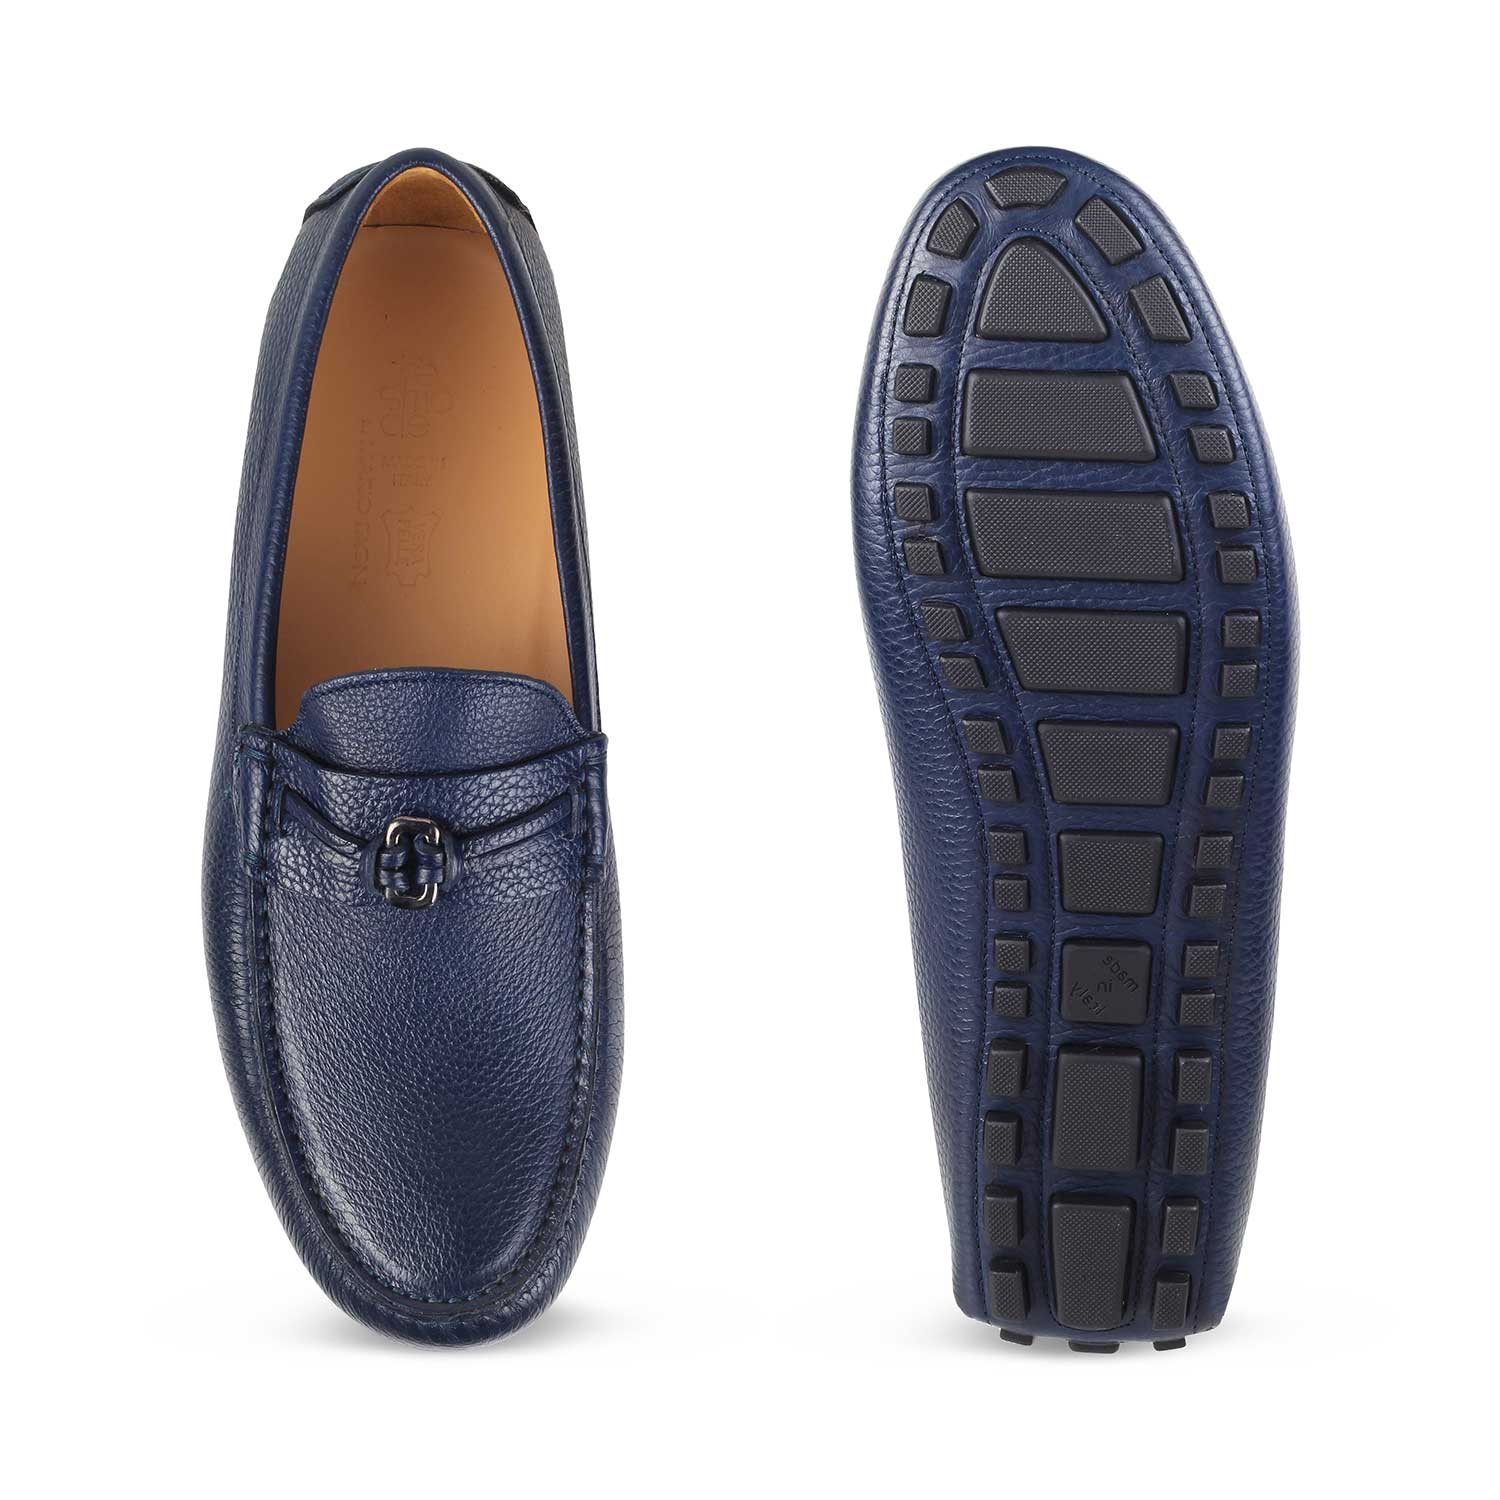 Tresmode-The Yacht Blue Men's Handcrafted Leather Driving Loafers Tresmode-Tresmode